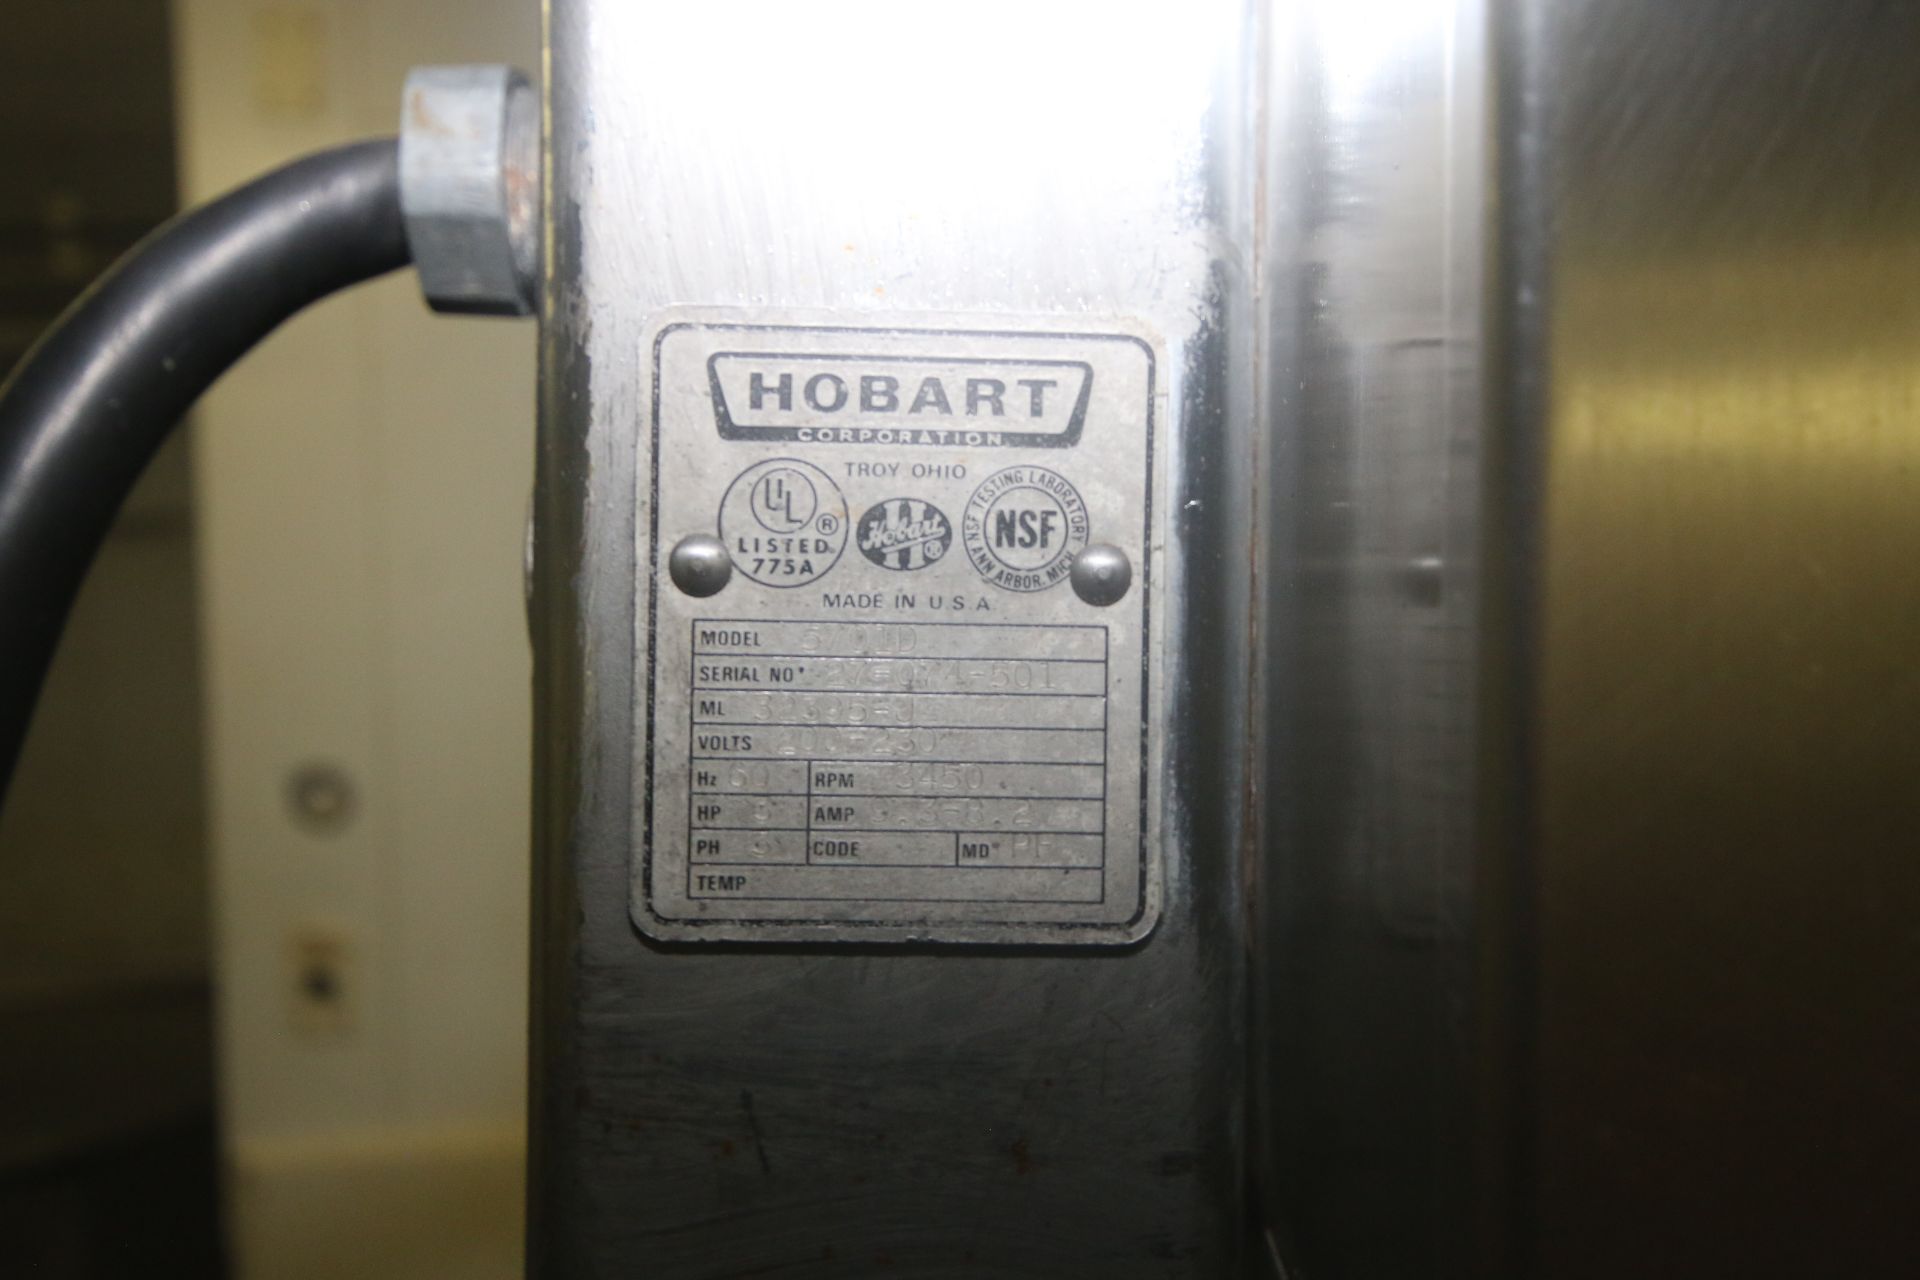 Hobart S/S Band Saw, M/N 5701D, S/N 27-074-501, 200-230 Volts, 3 Phase, with S/S Cutting Area, - Image 7 of 7